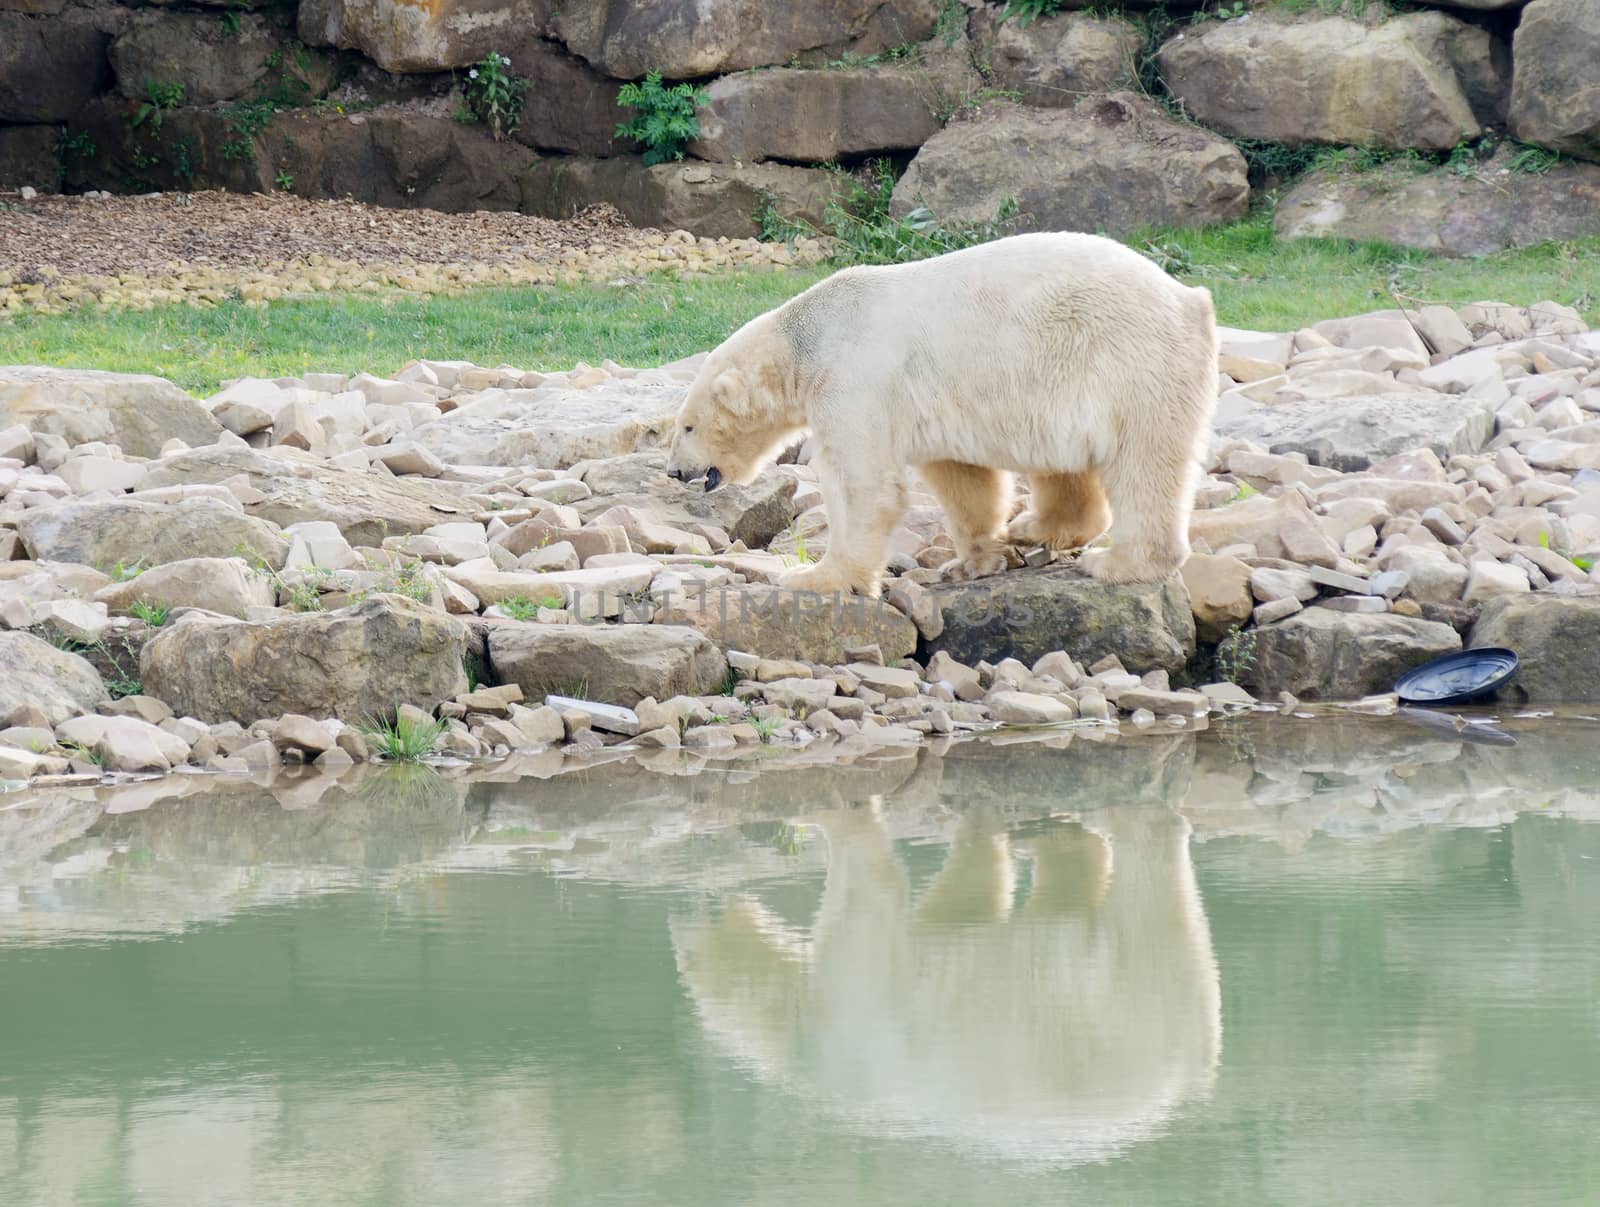 Polar bear by melted water with detritus and rubbish